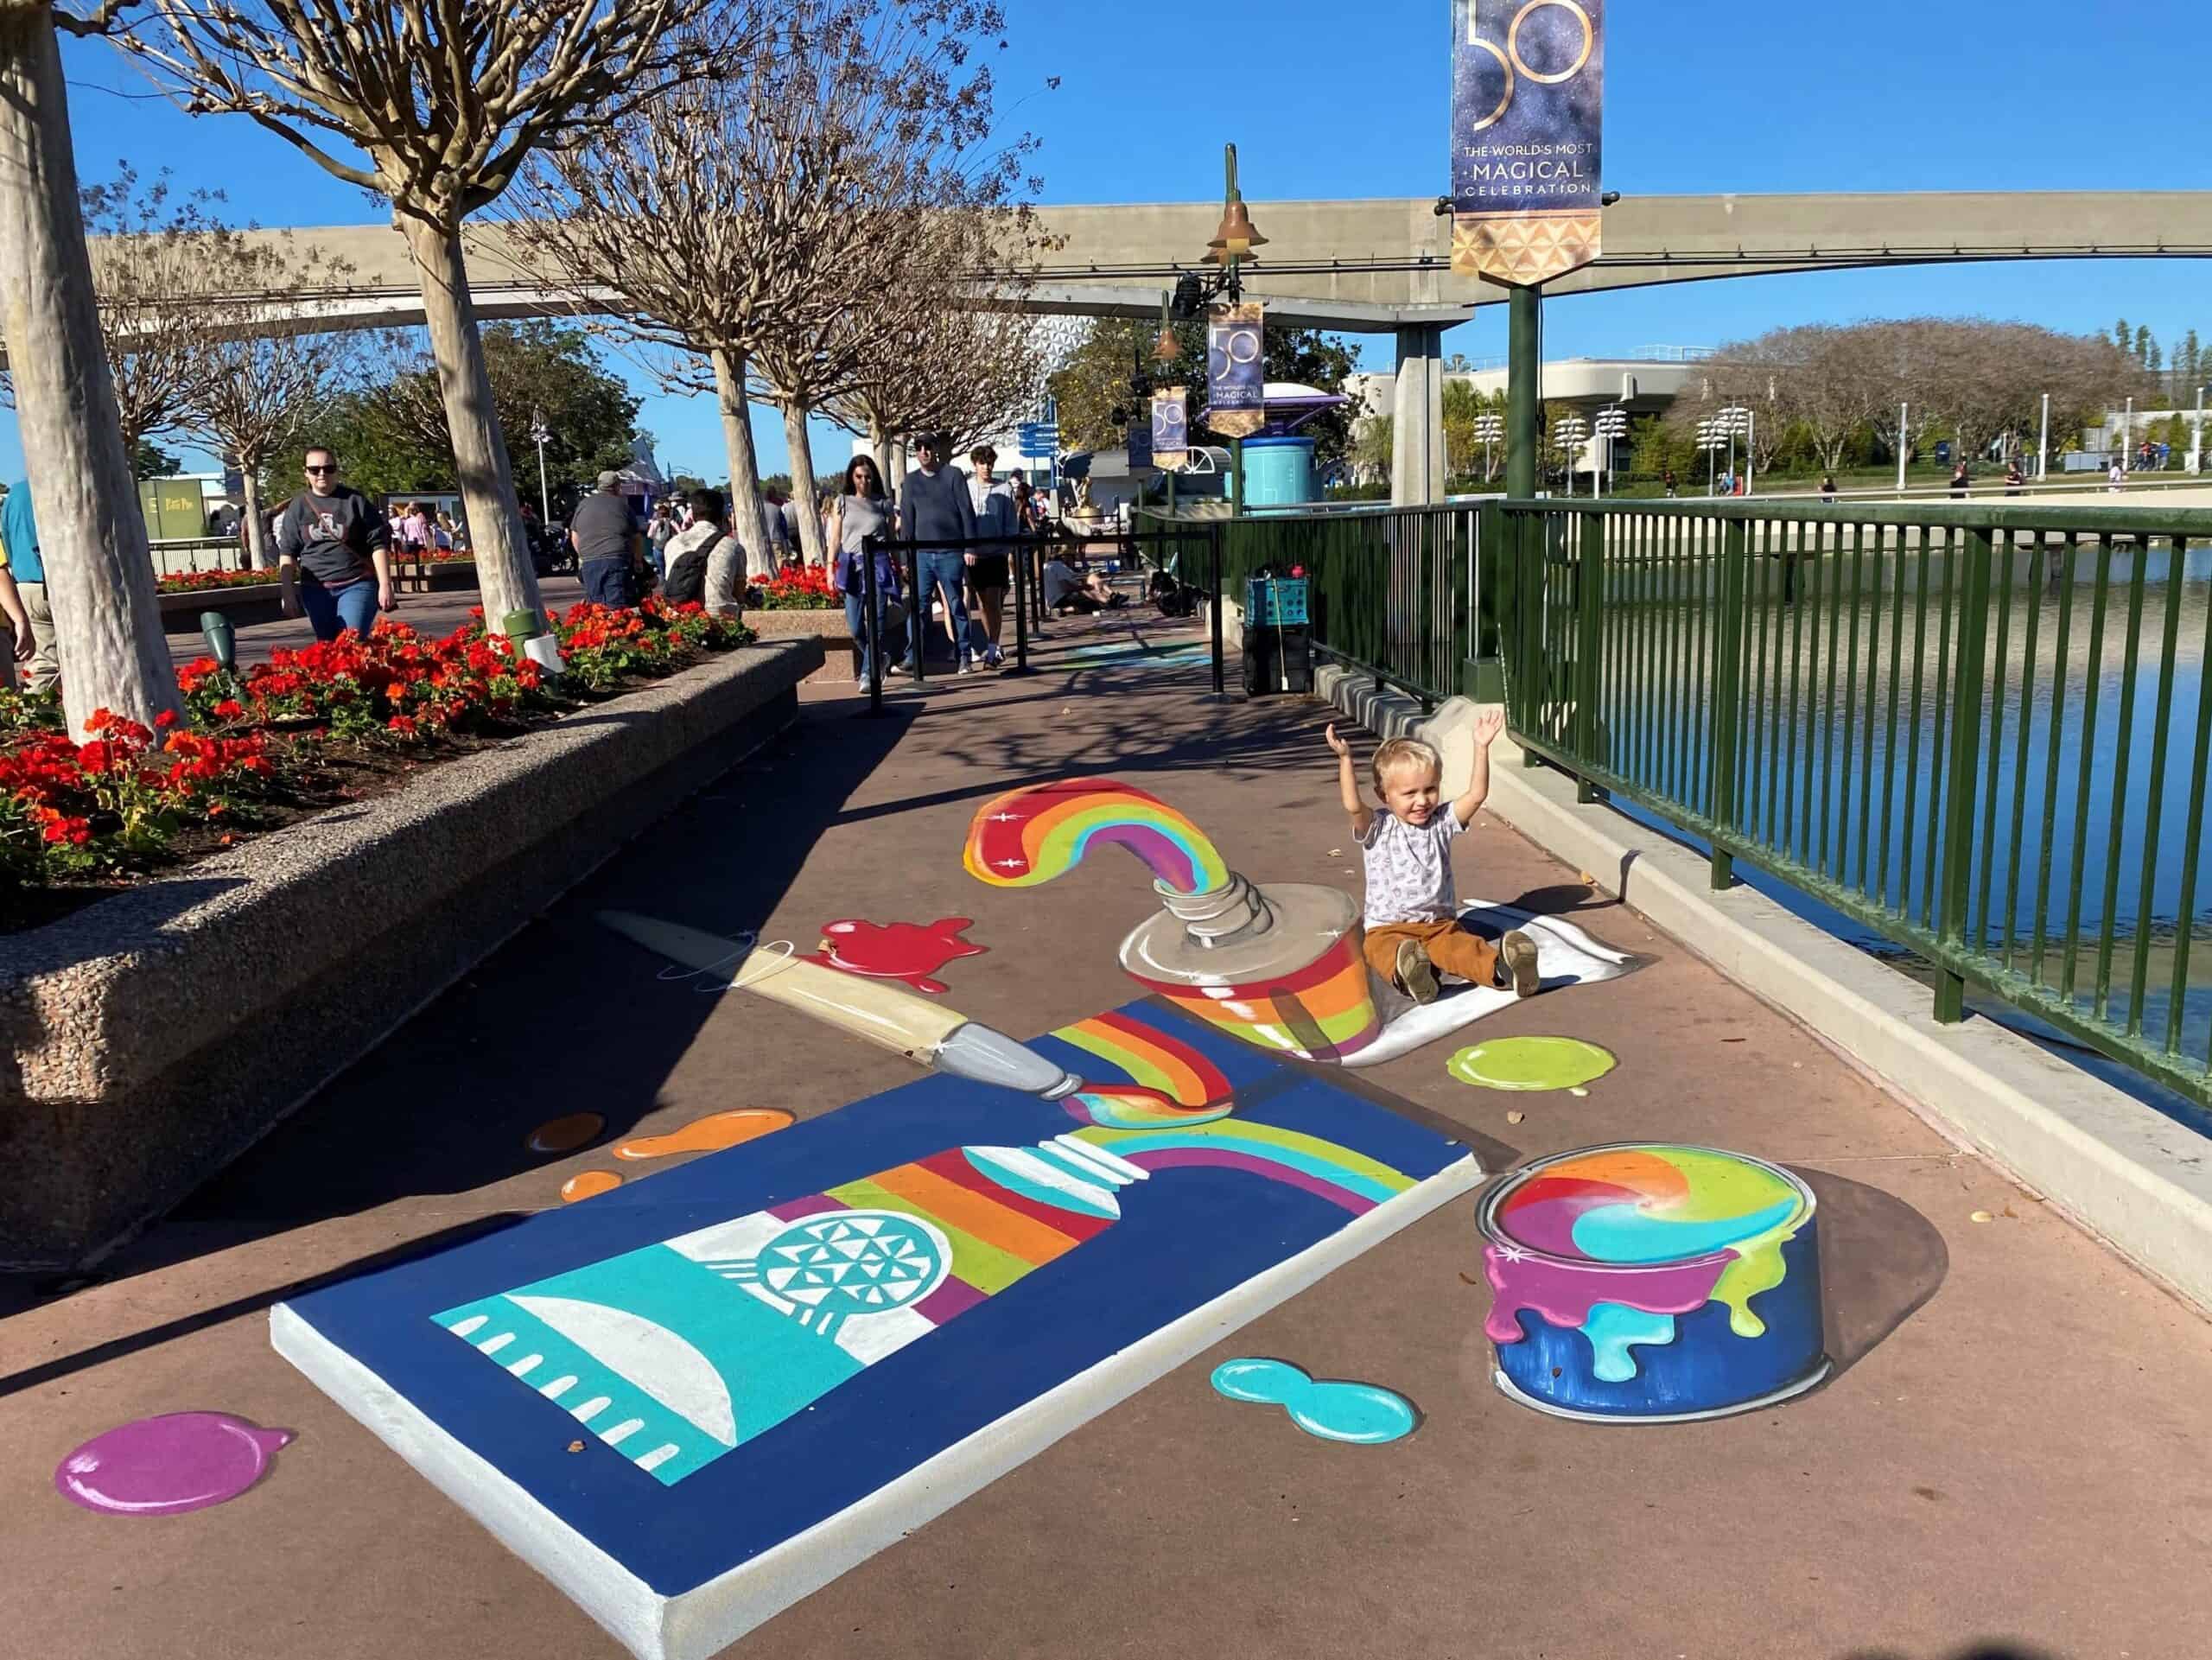 3D Chalk Art at Epcot is perfect for family photos